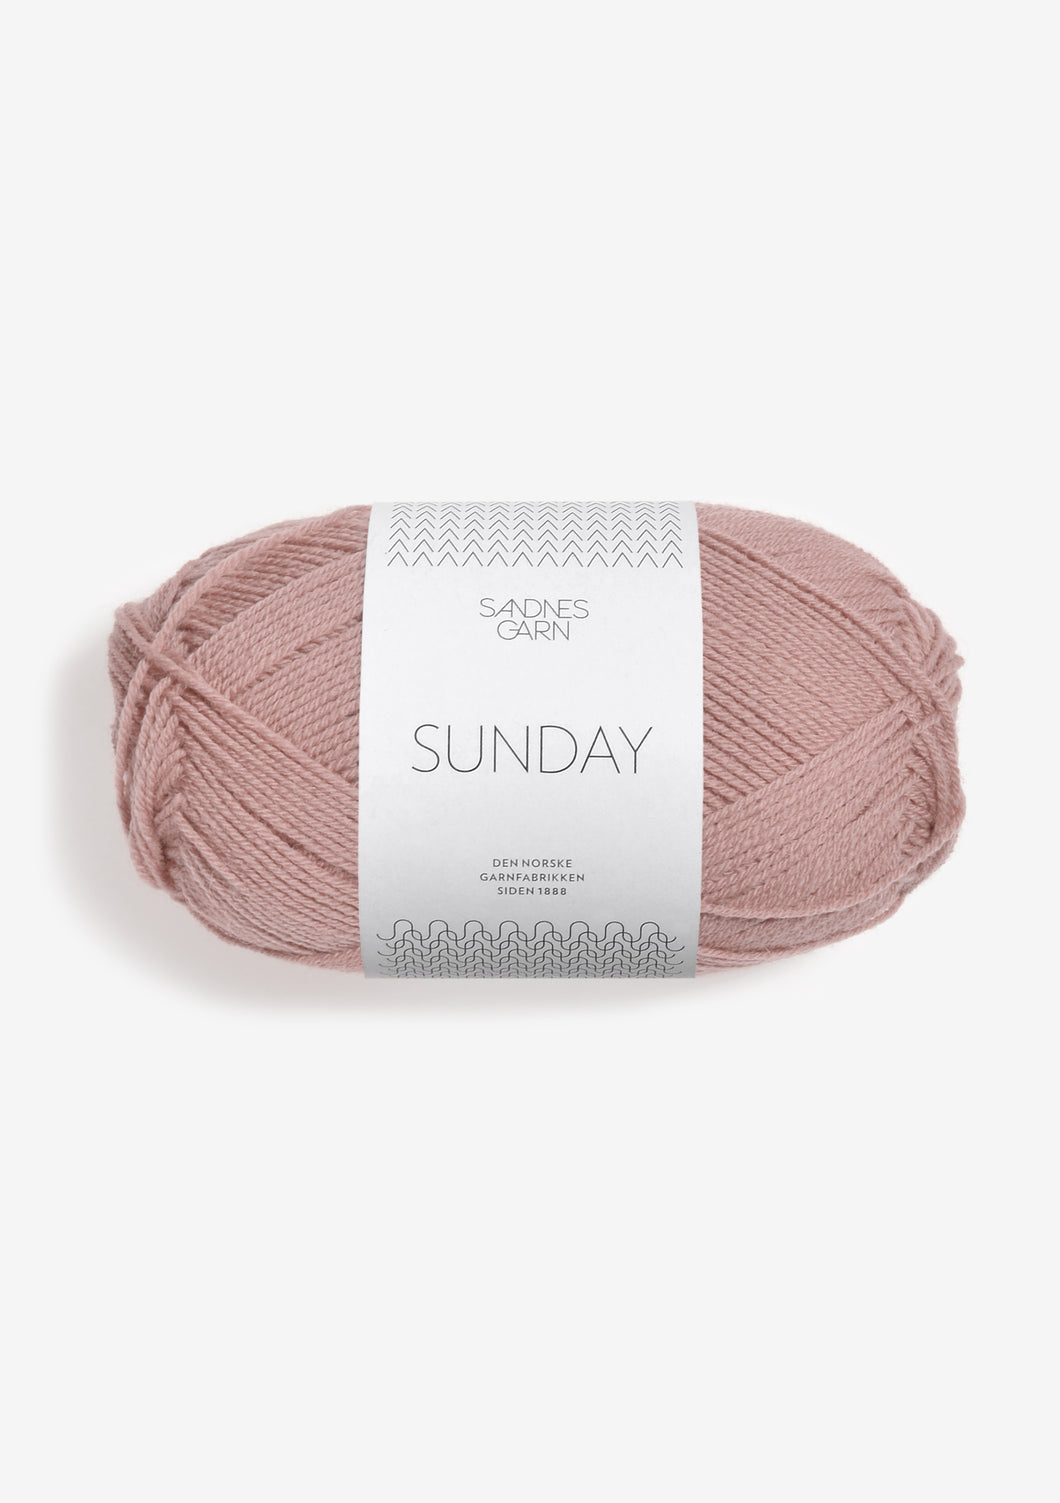 SUNDAY by Sandnes - Dusty Pink 4332